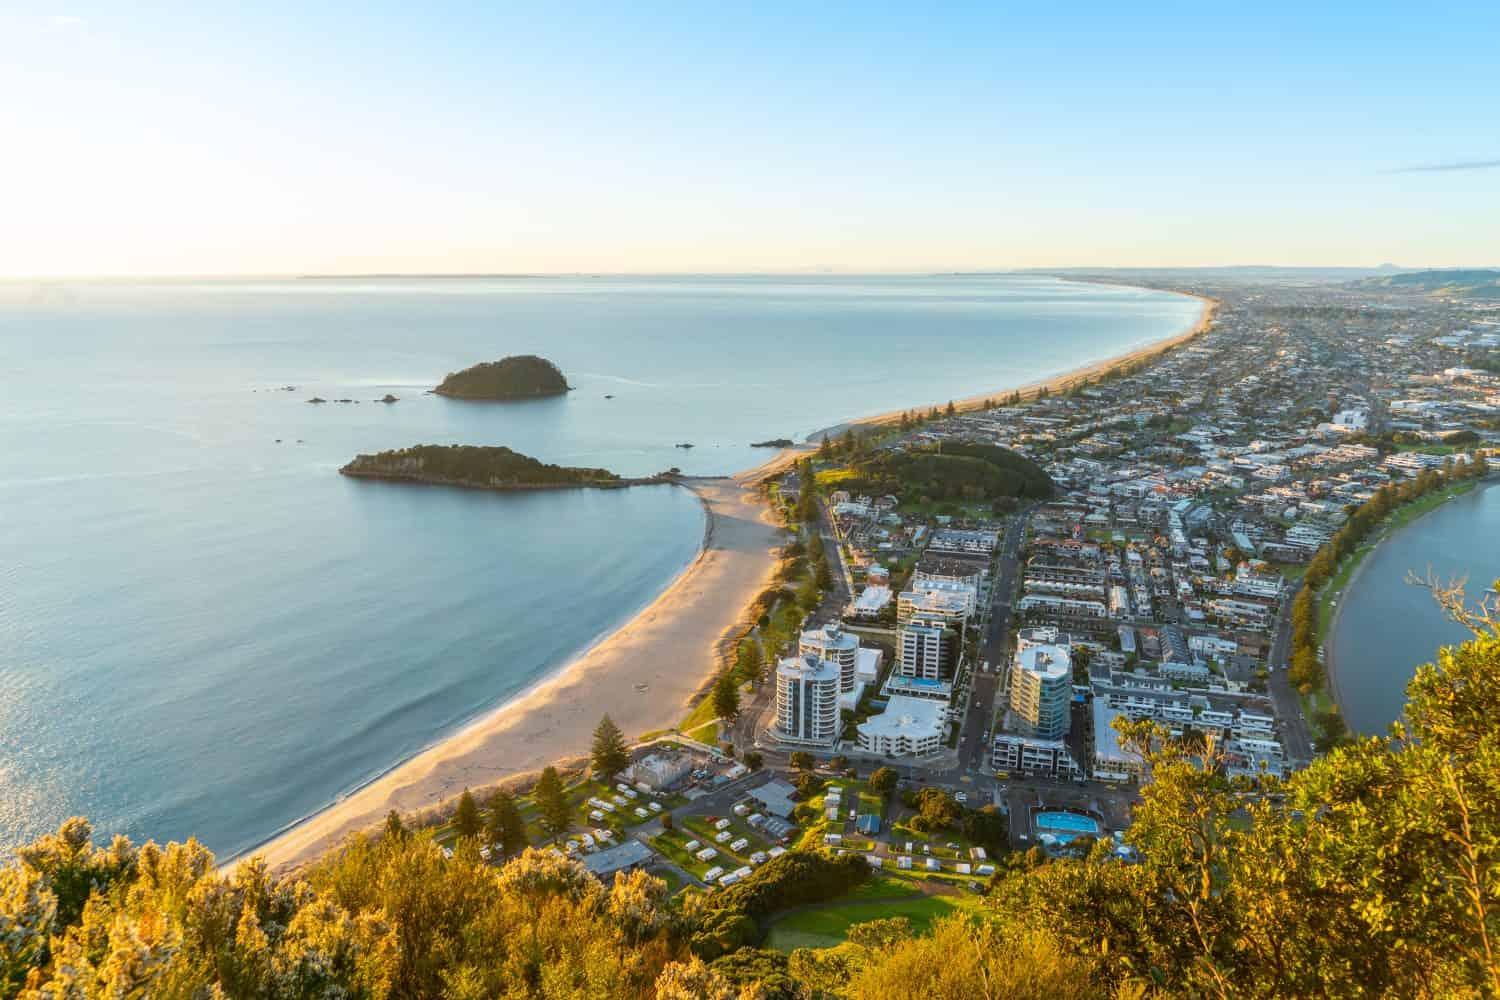 Mount Maunganui stretches out below as sun rises on horizon and falls across ocean beach and buildings below